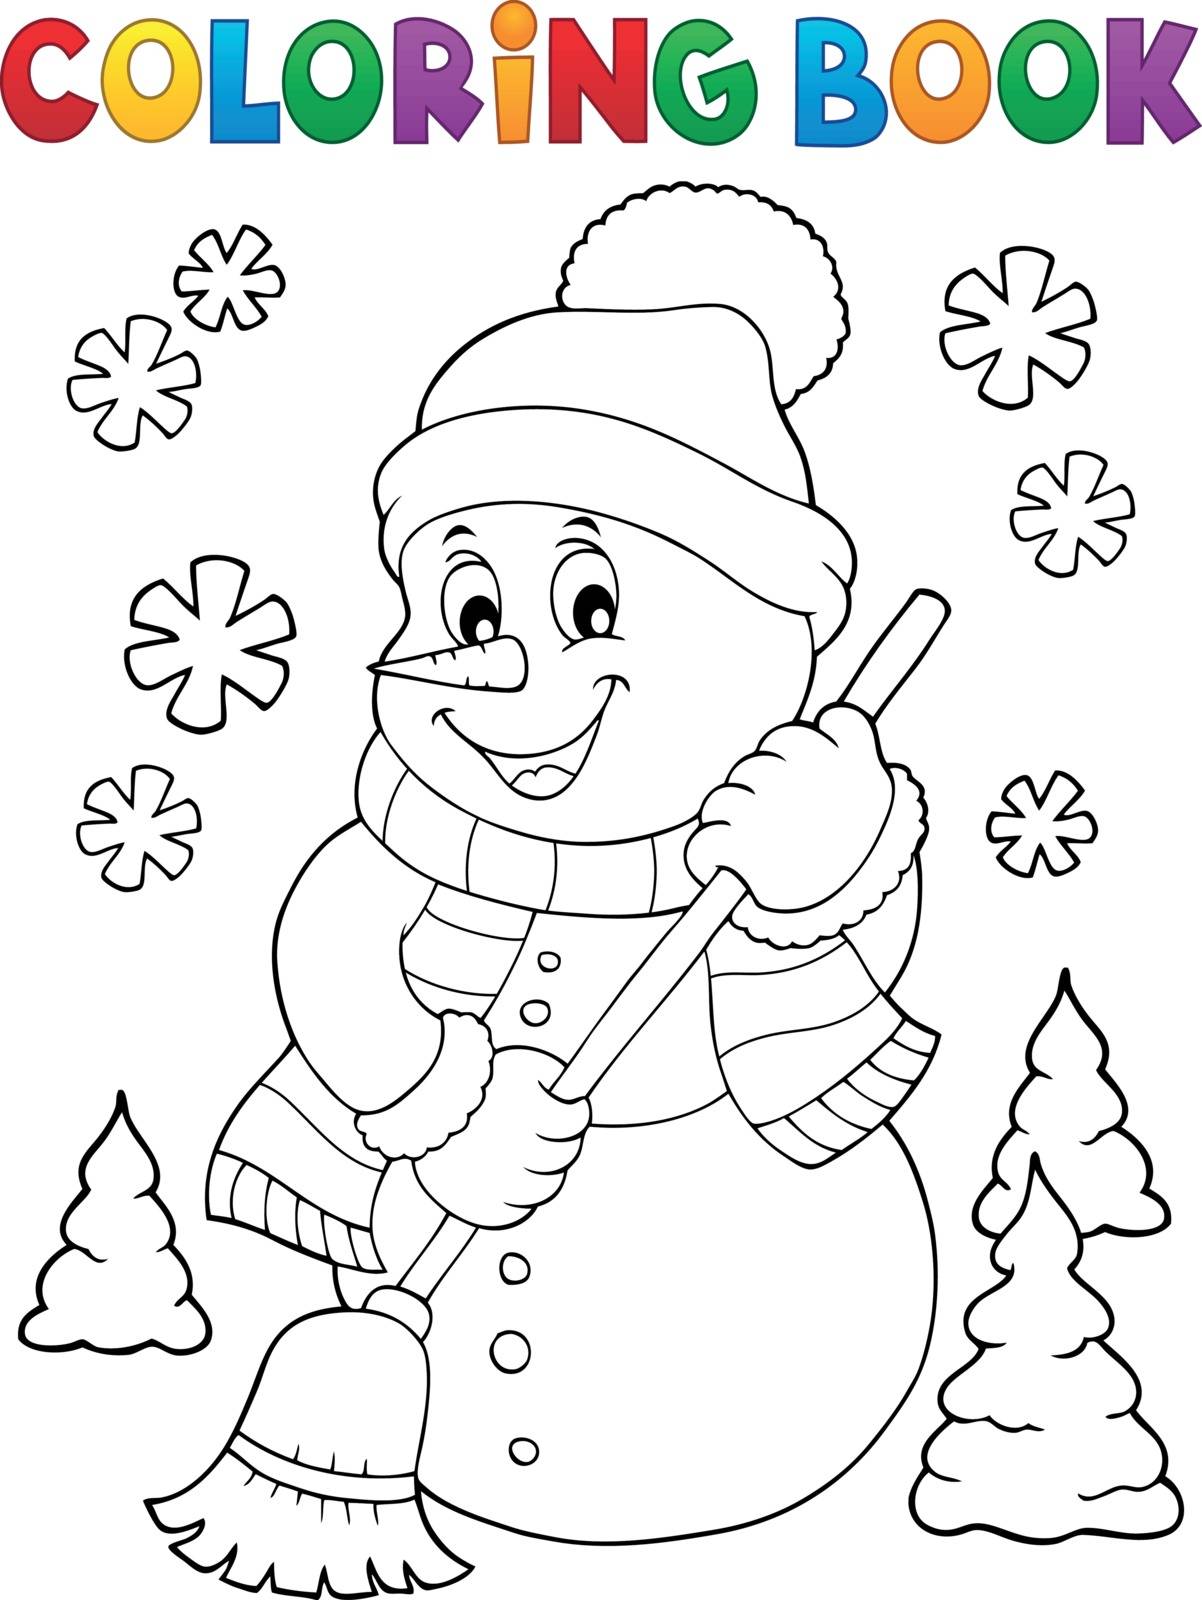 Coloring book snowman topic 5 by clairev